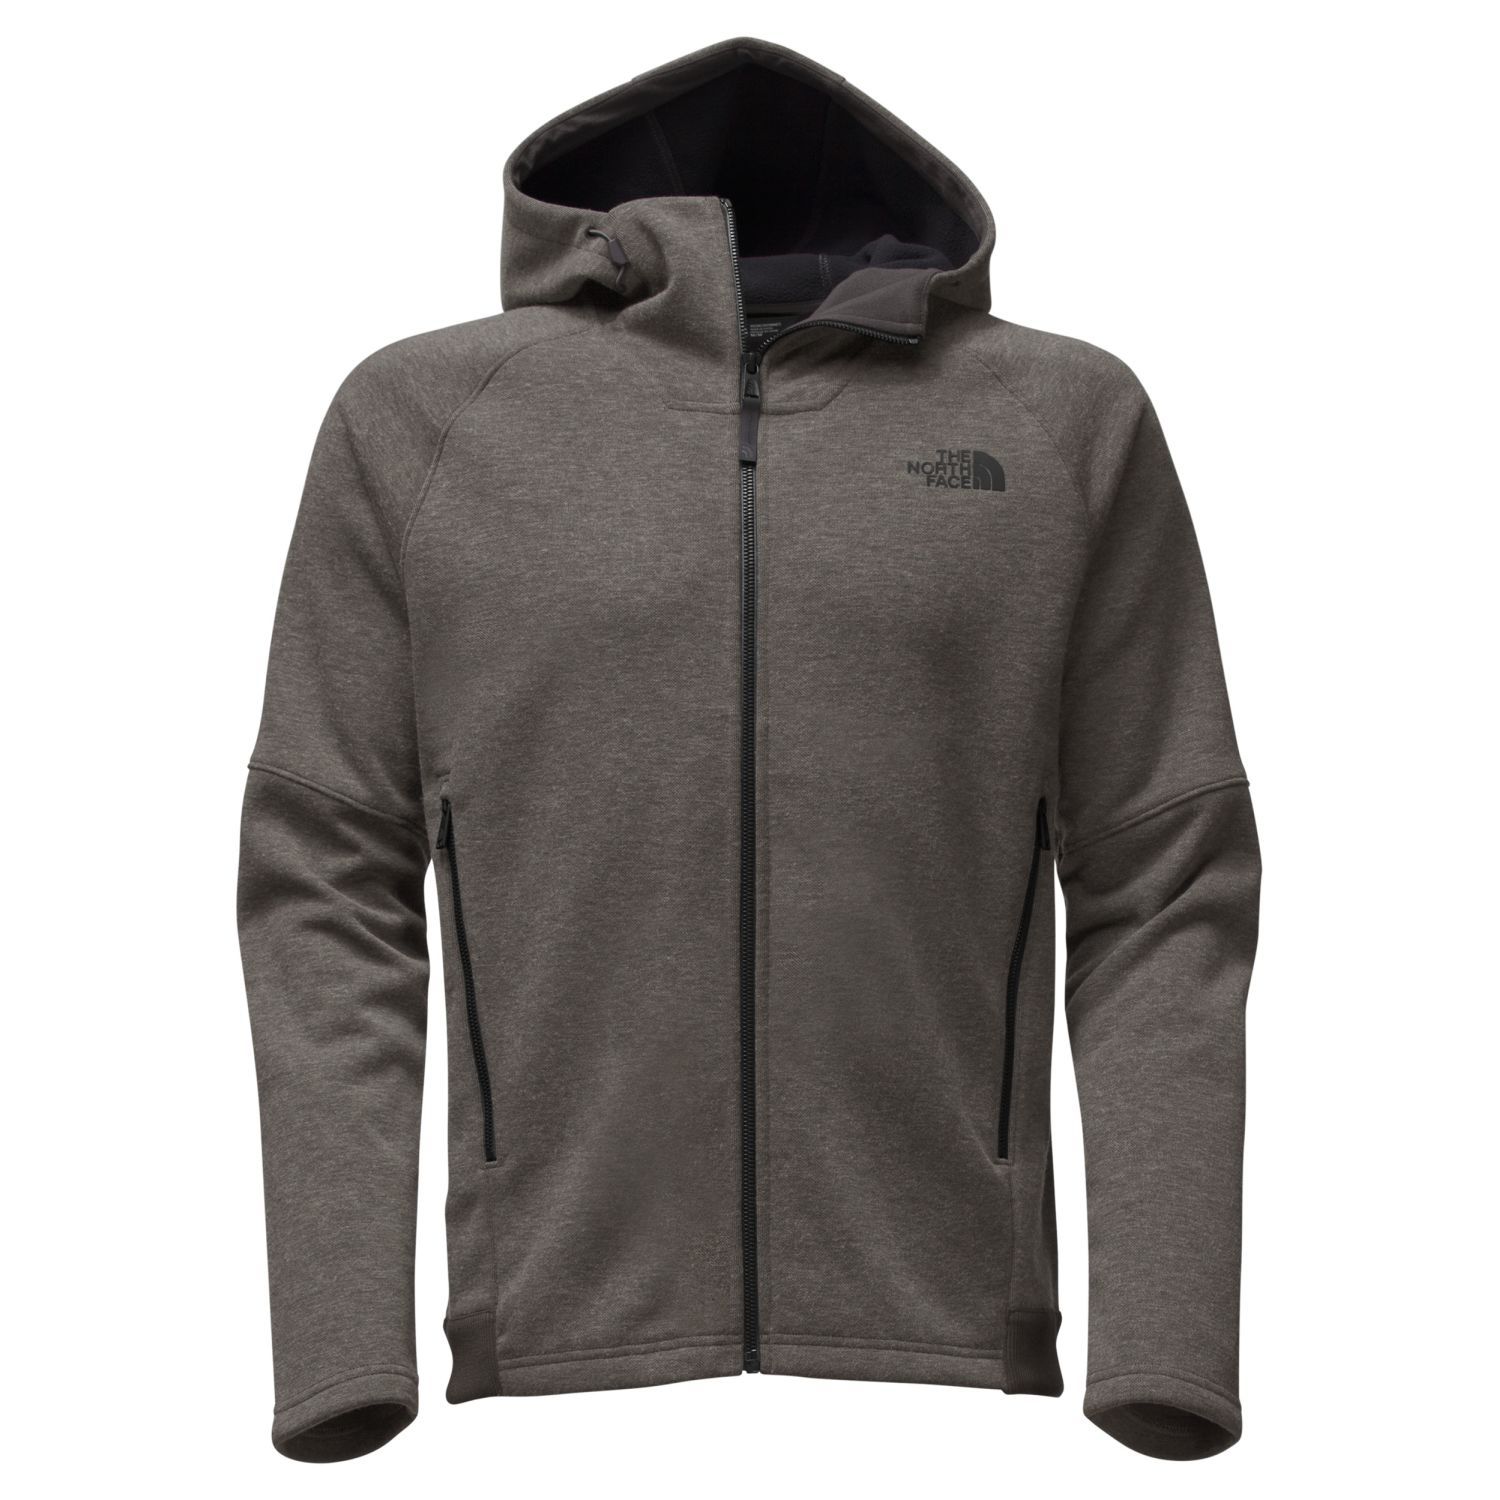 the north face trunorth hoodie